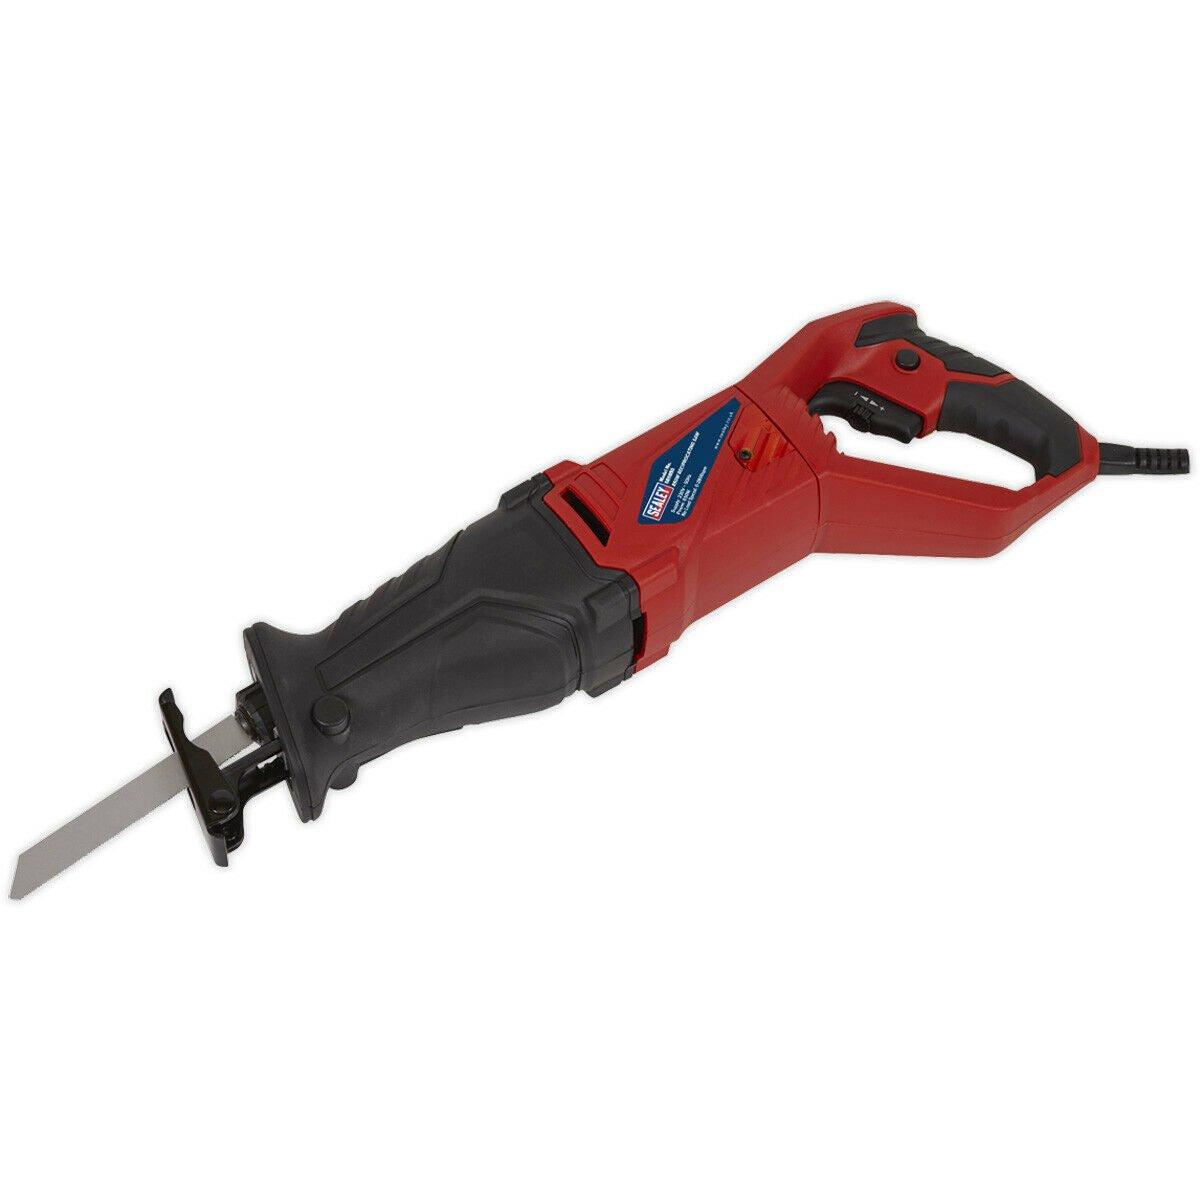 Electric Reciprocating Saw - 850W 230V - ROTATING HANDLE - Wood & Metal Cutter